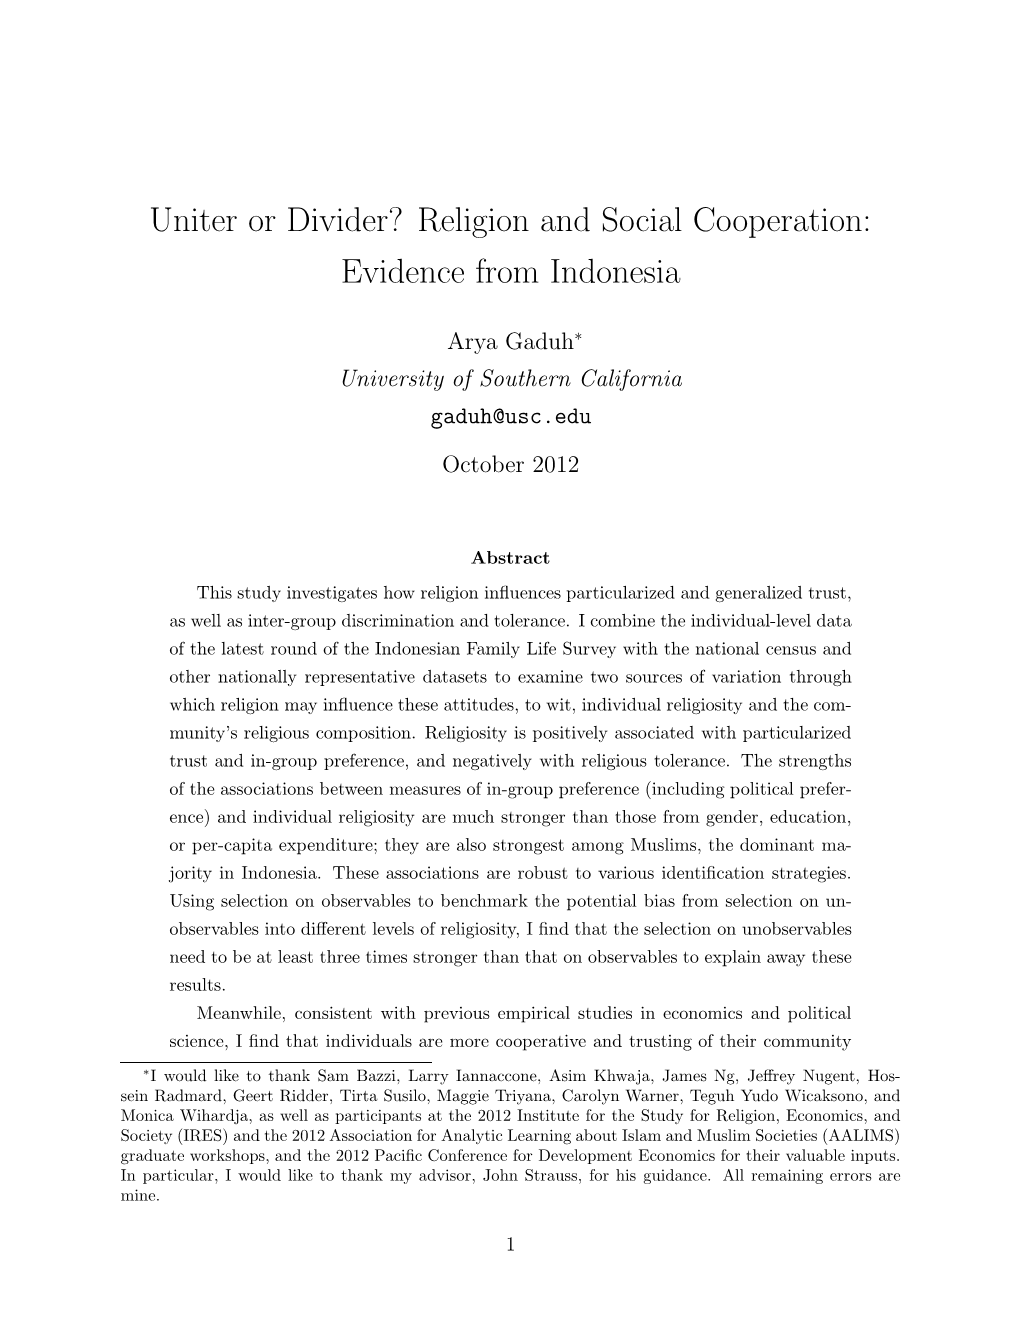 Uniter Or Divider? Religion and Social Cooperation: Evidence from Indonesia